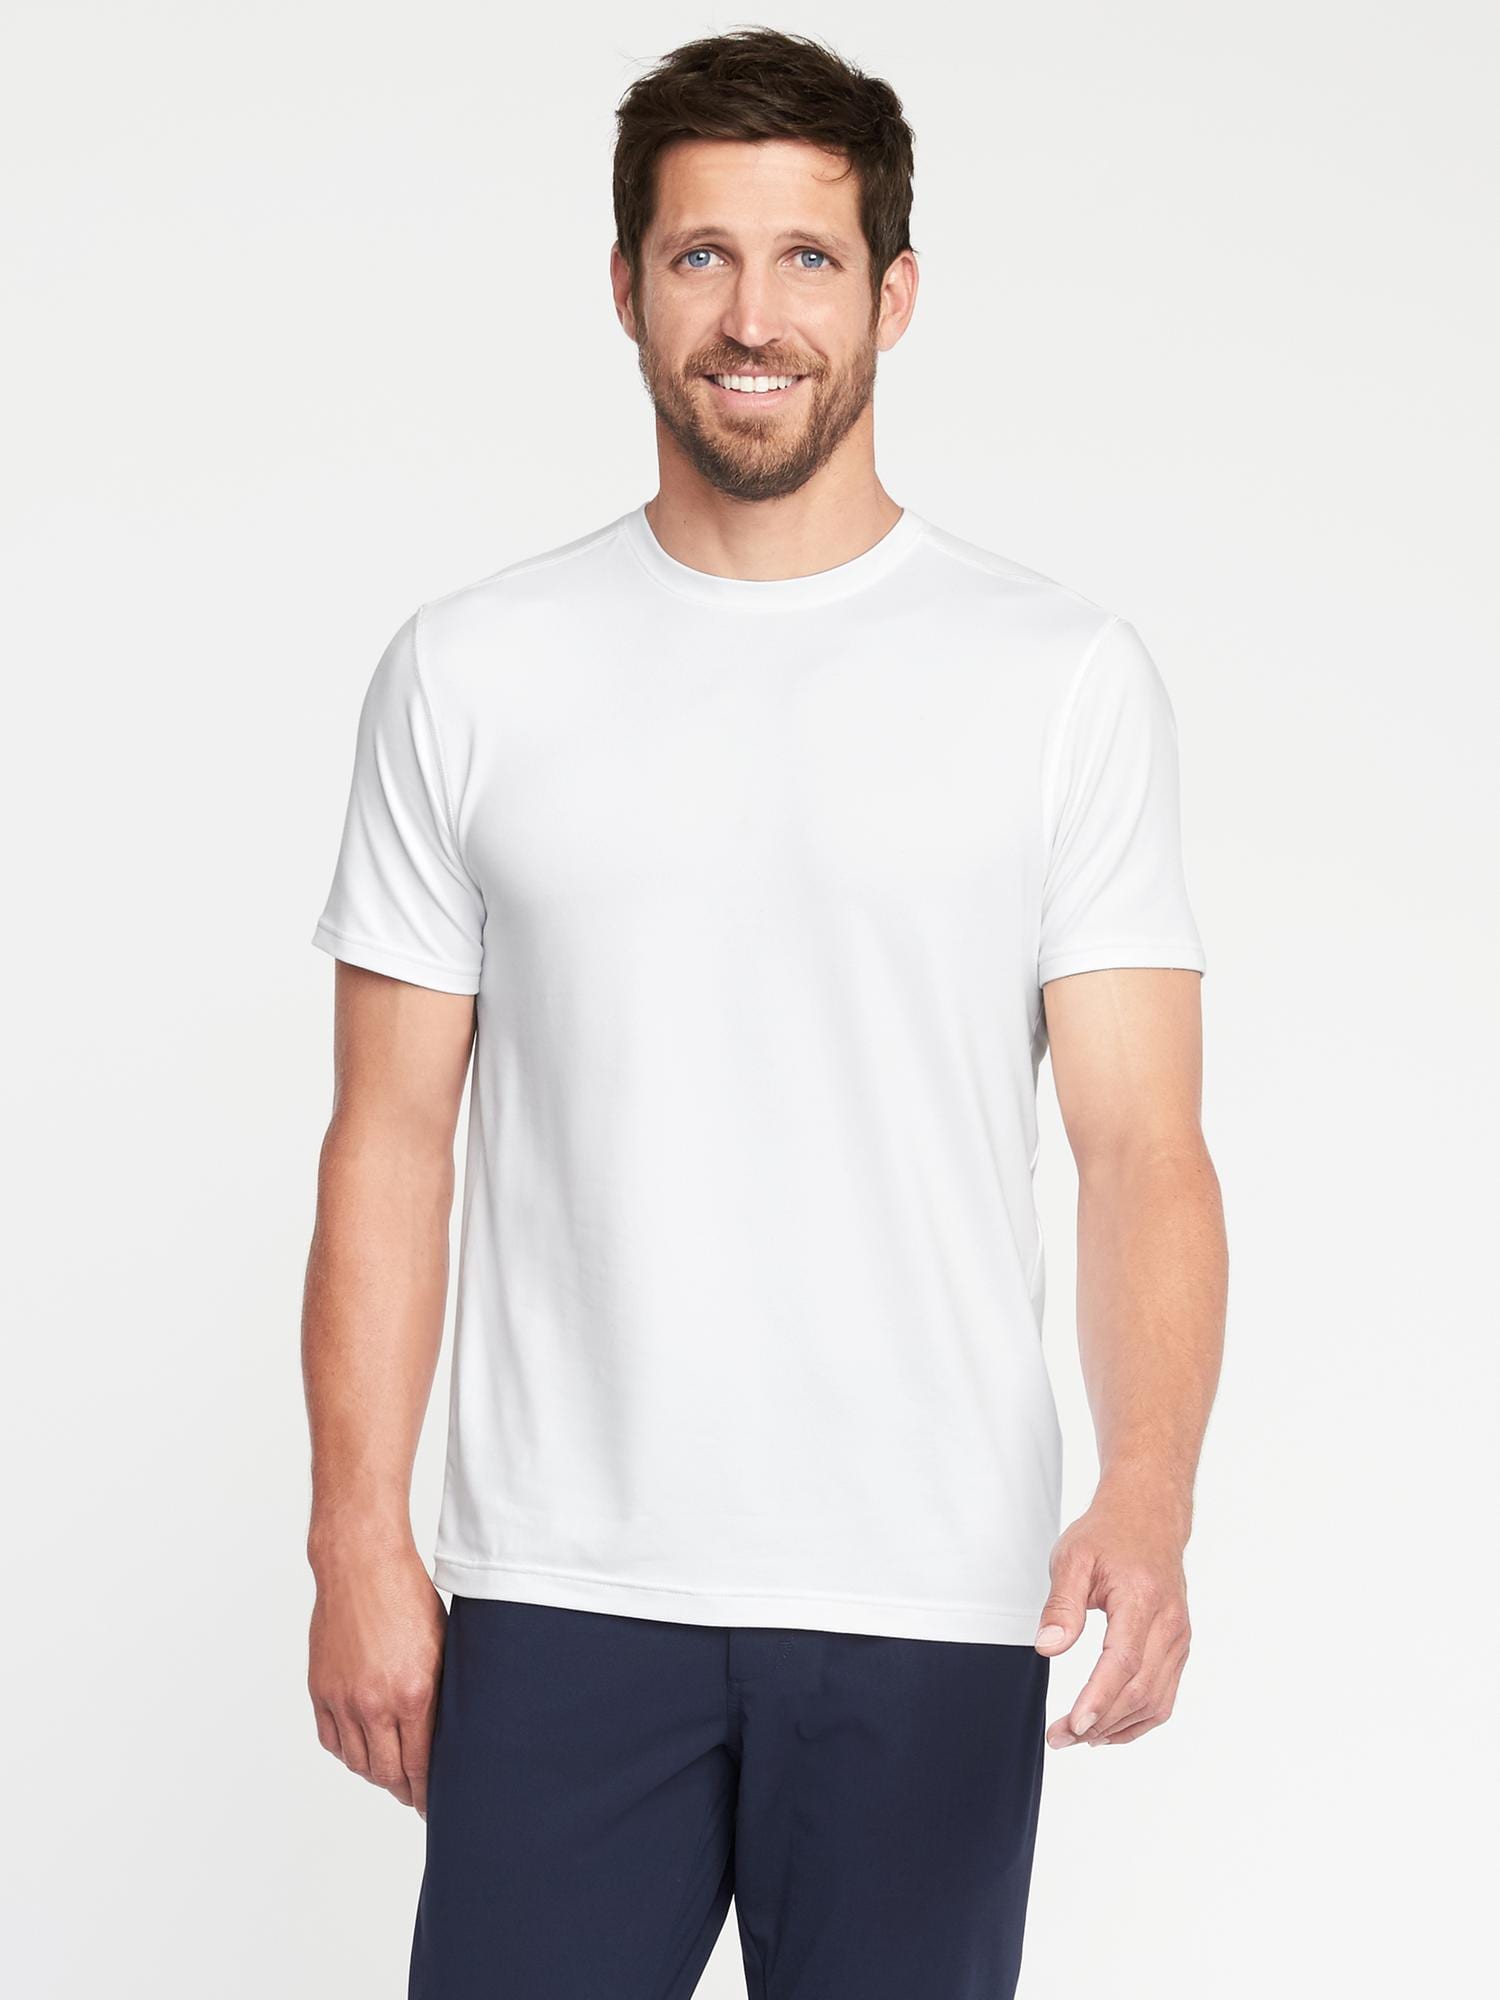 Go-Dry Performance Stretch Tee for Men | Old Navy